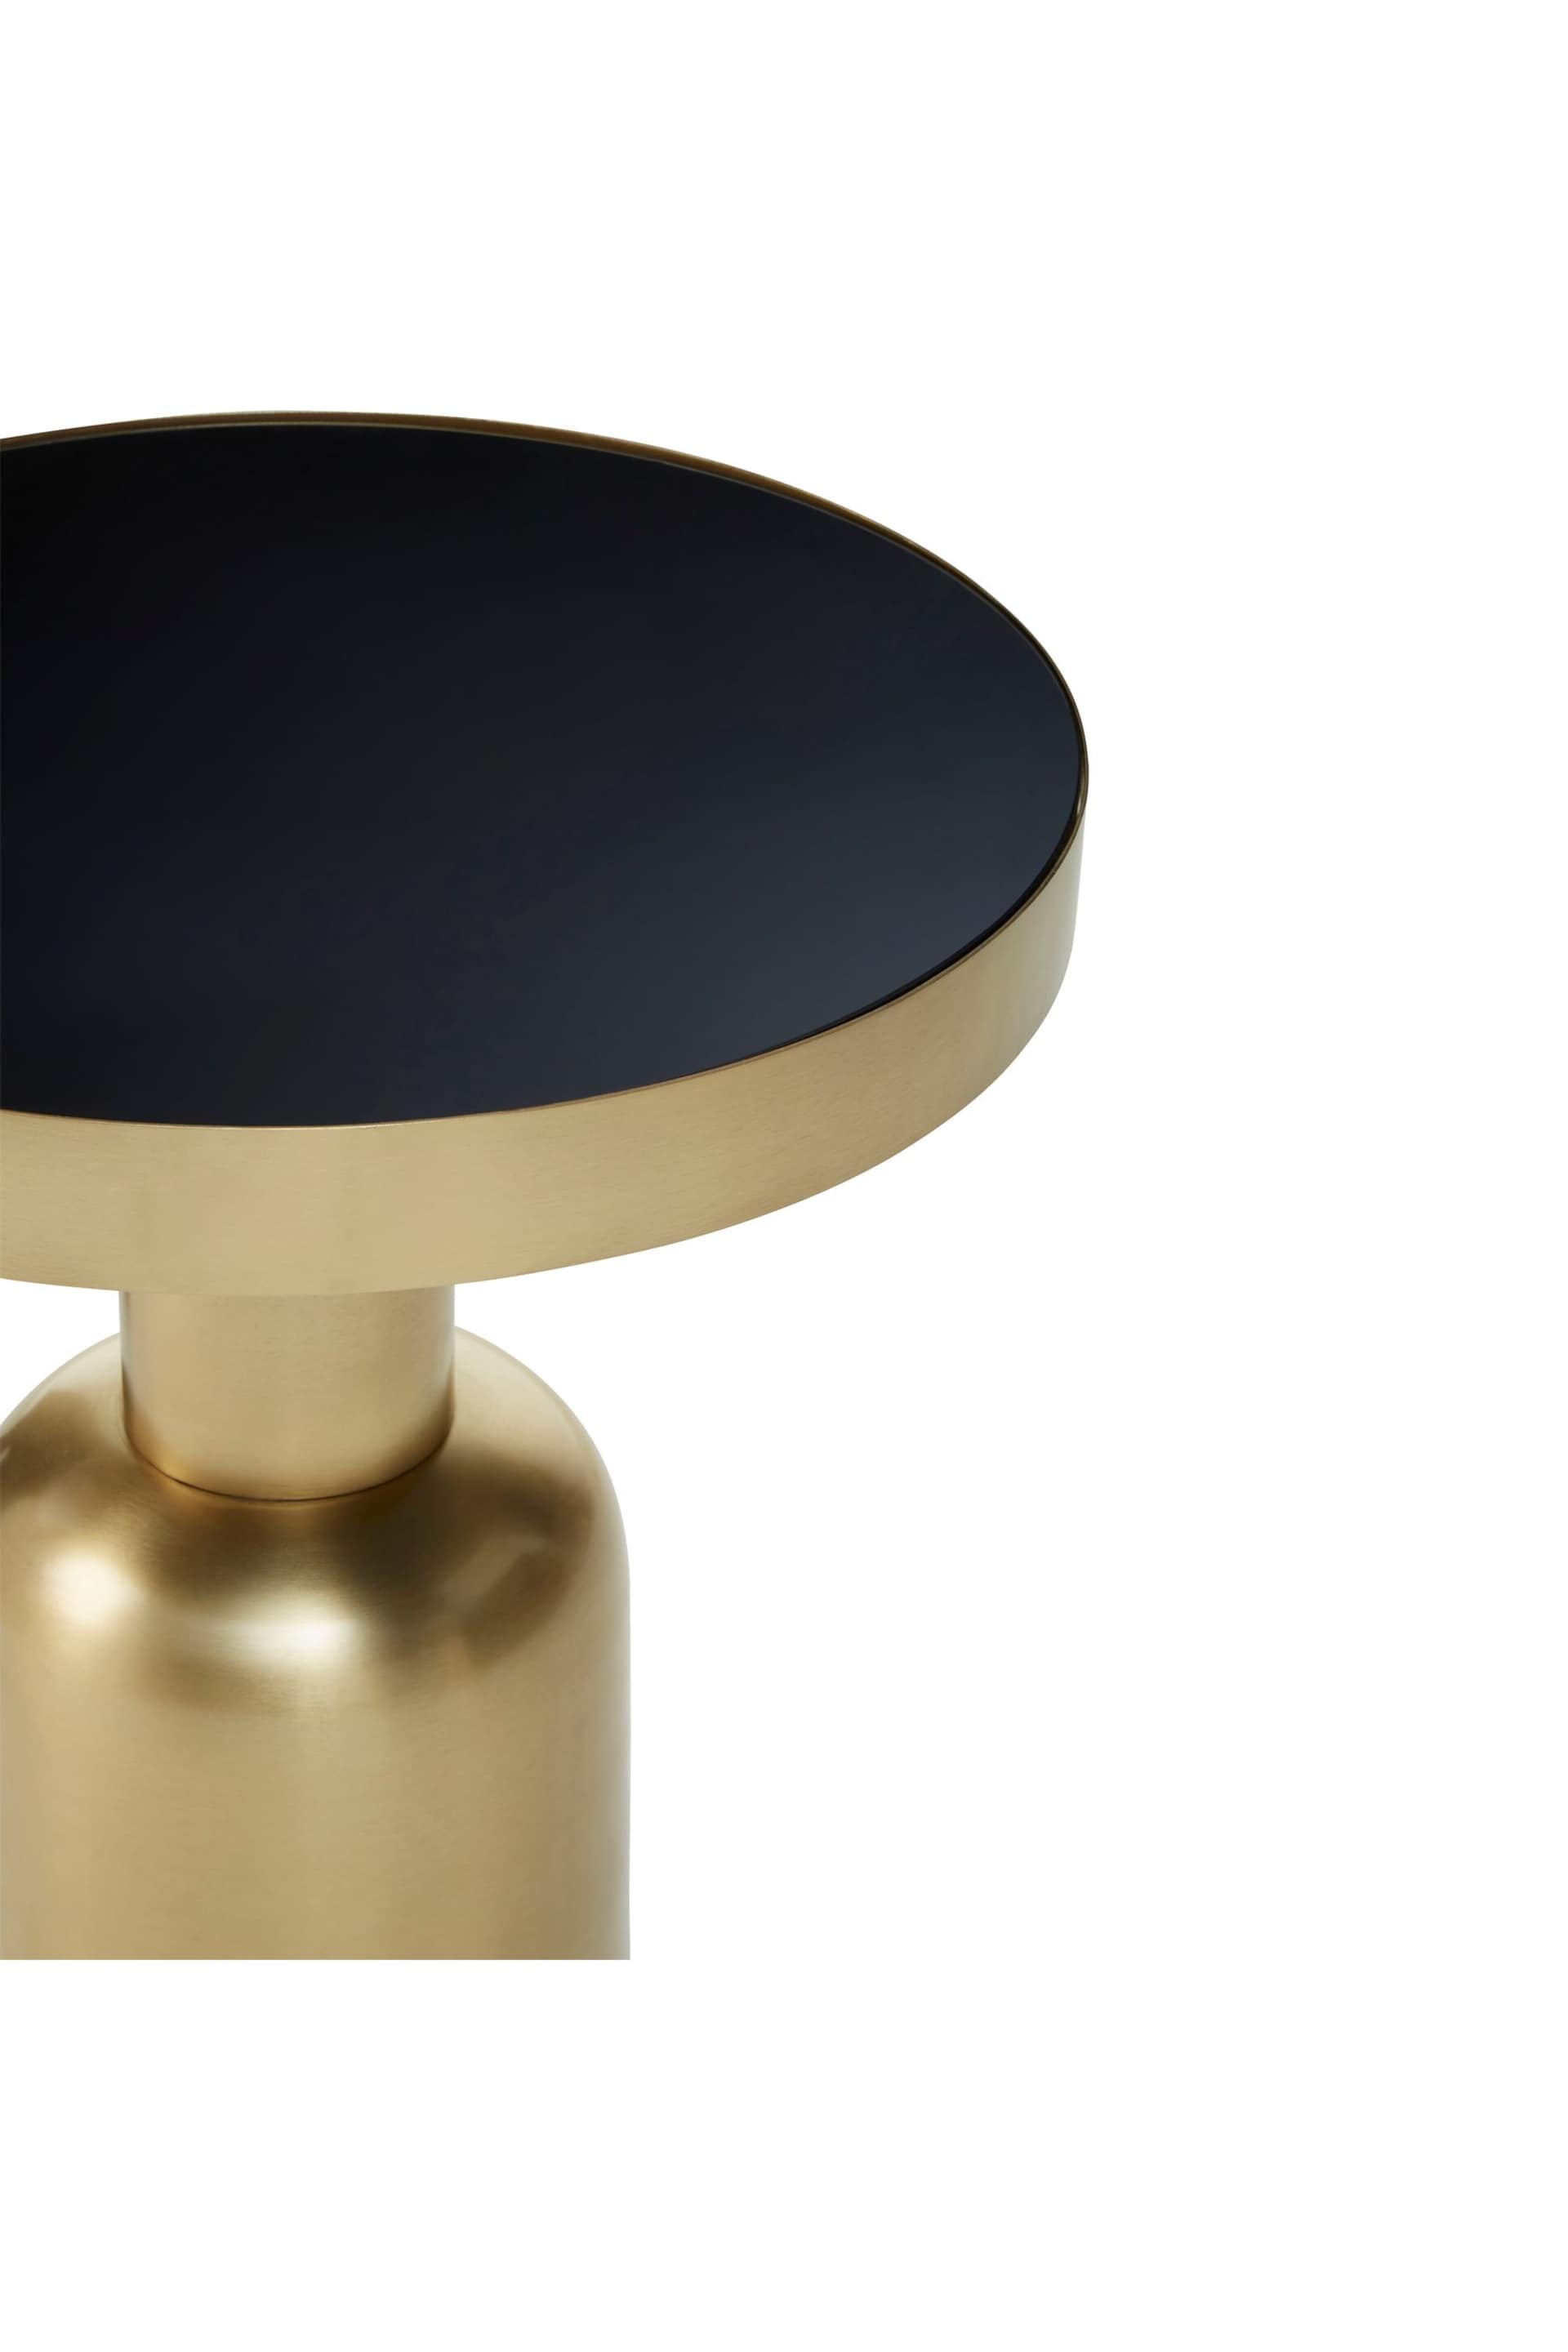 Fifty Five South Gold Corra Large Side Table - Image 4 of 4